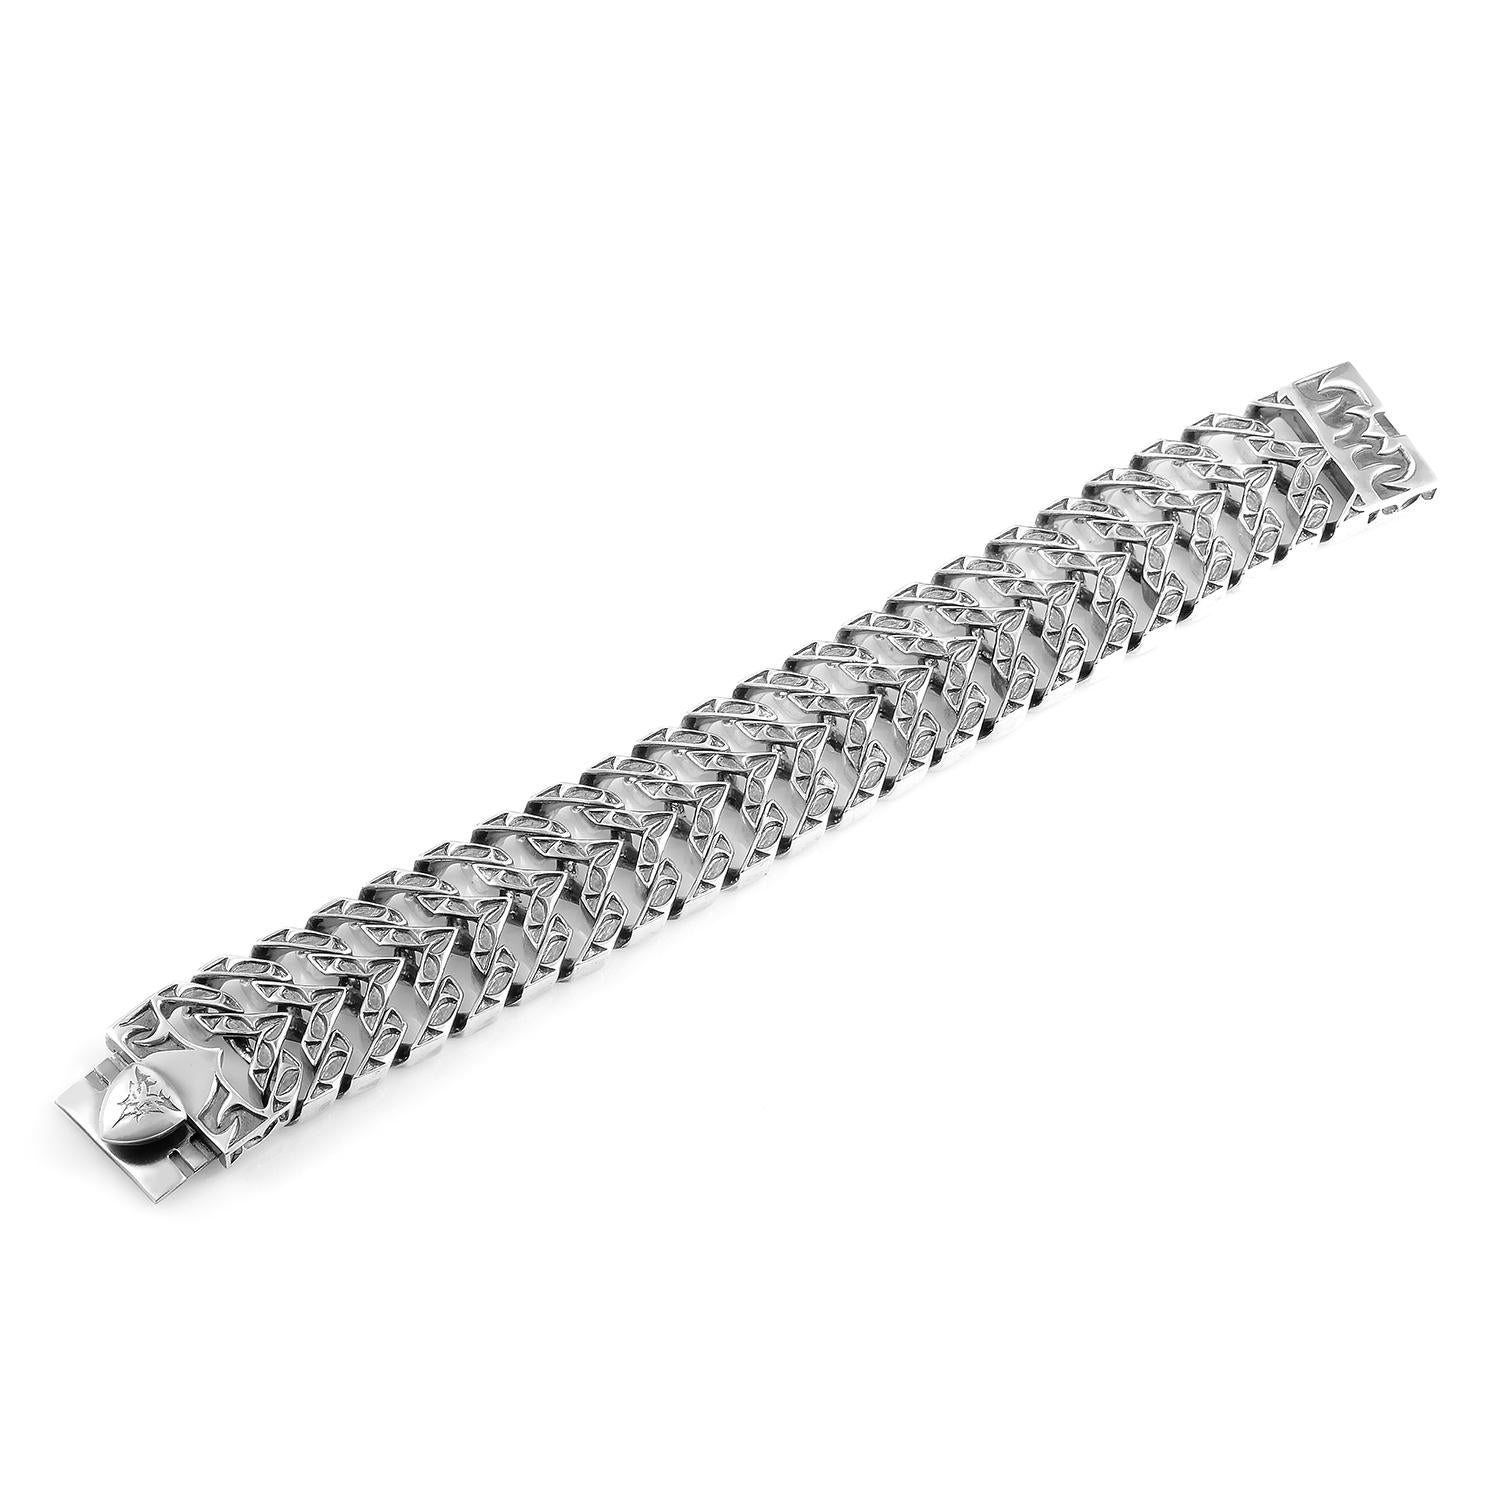 This rugged Stephen Webster men's bracelet from the Thorn collection is a masculine gem. Double curb S-links create in interesting base for the oxidized silver impressions. The combination of light and darkened sterling silver creates a subtle yet